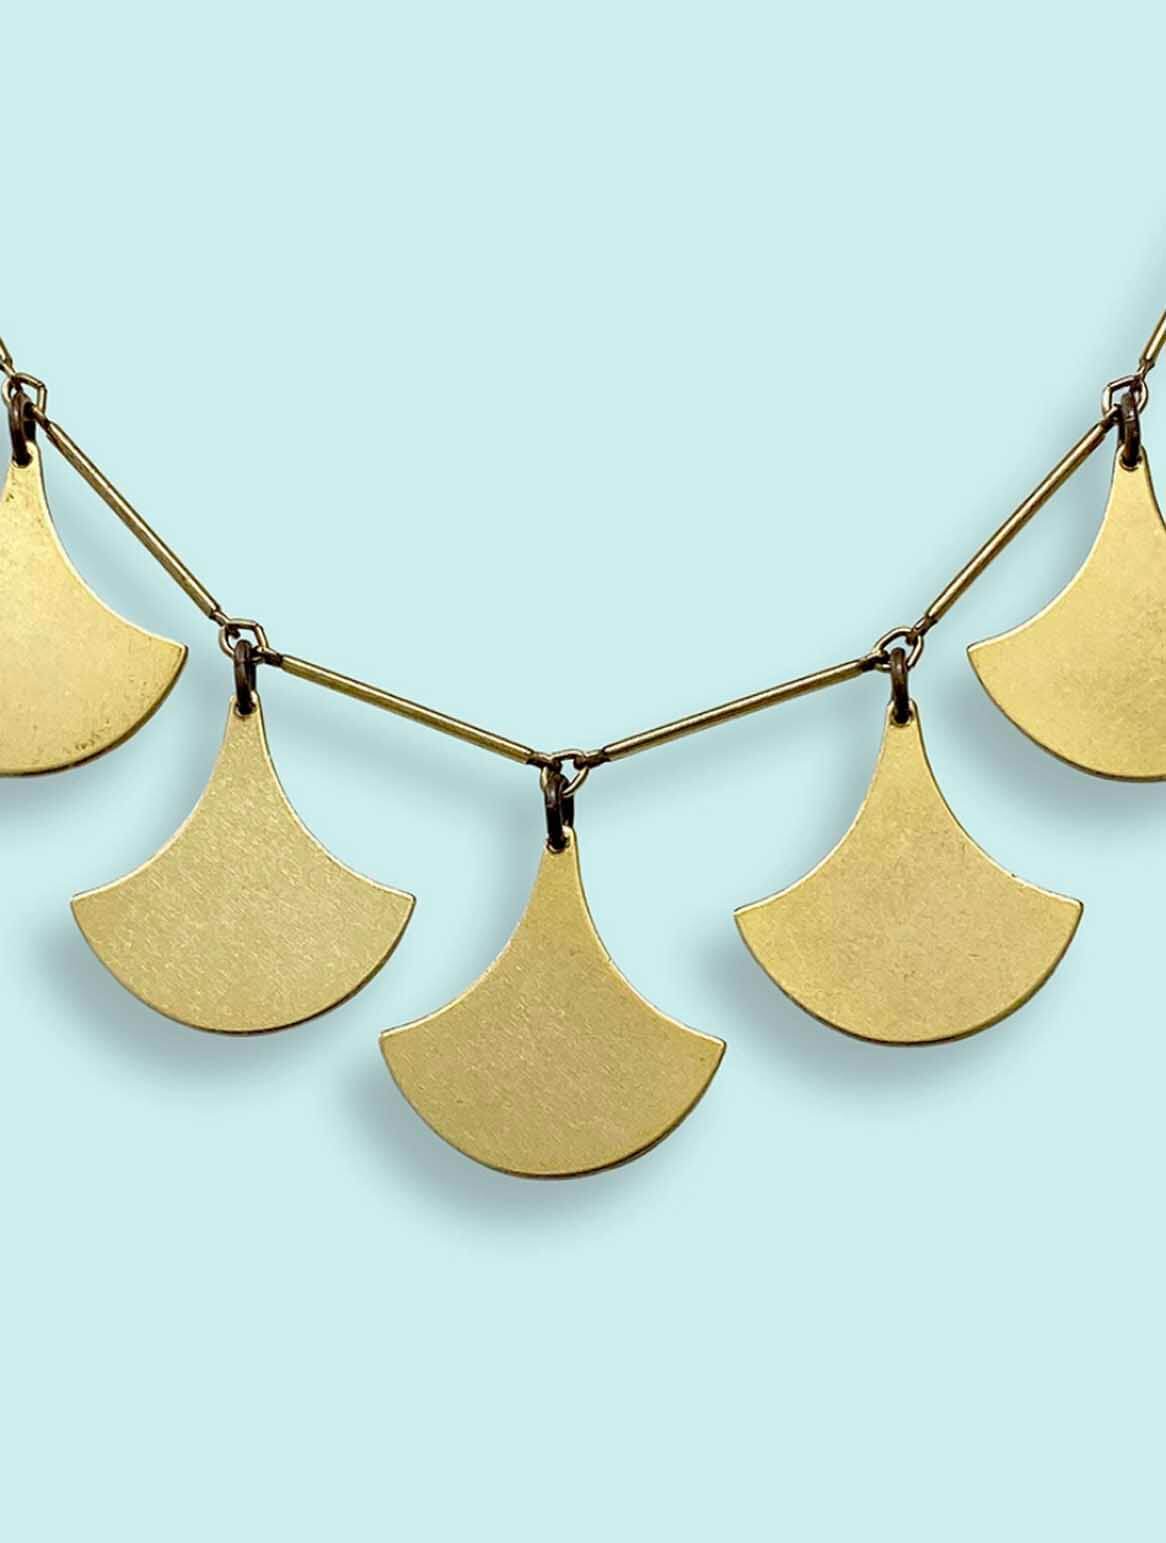 Five Ax Necklace in Gold